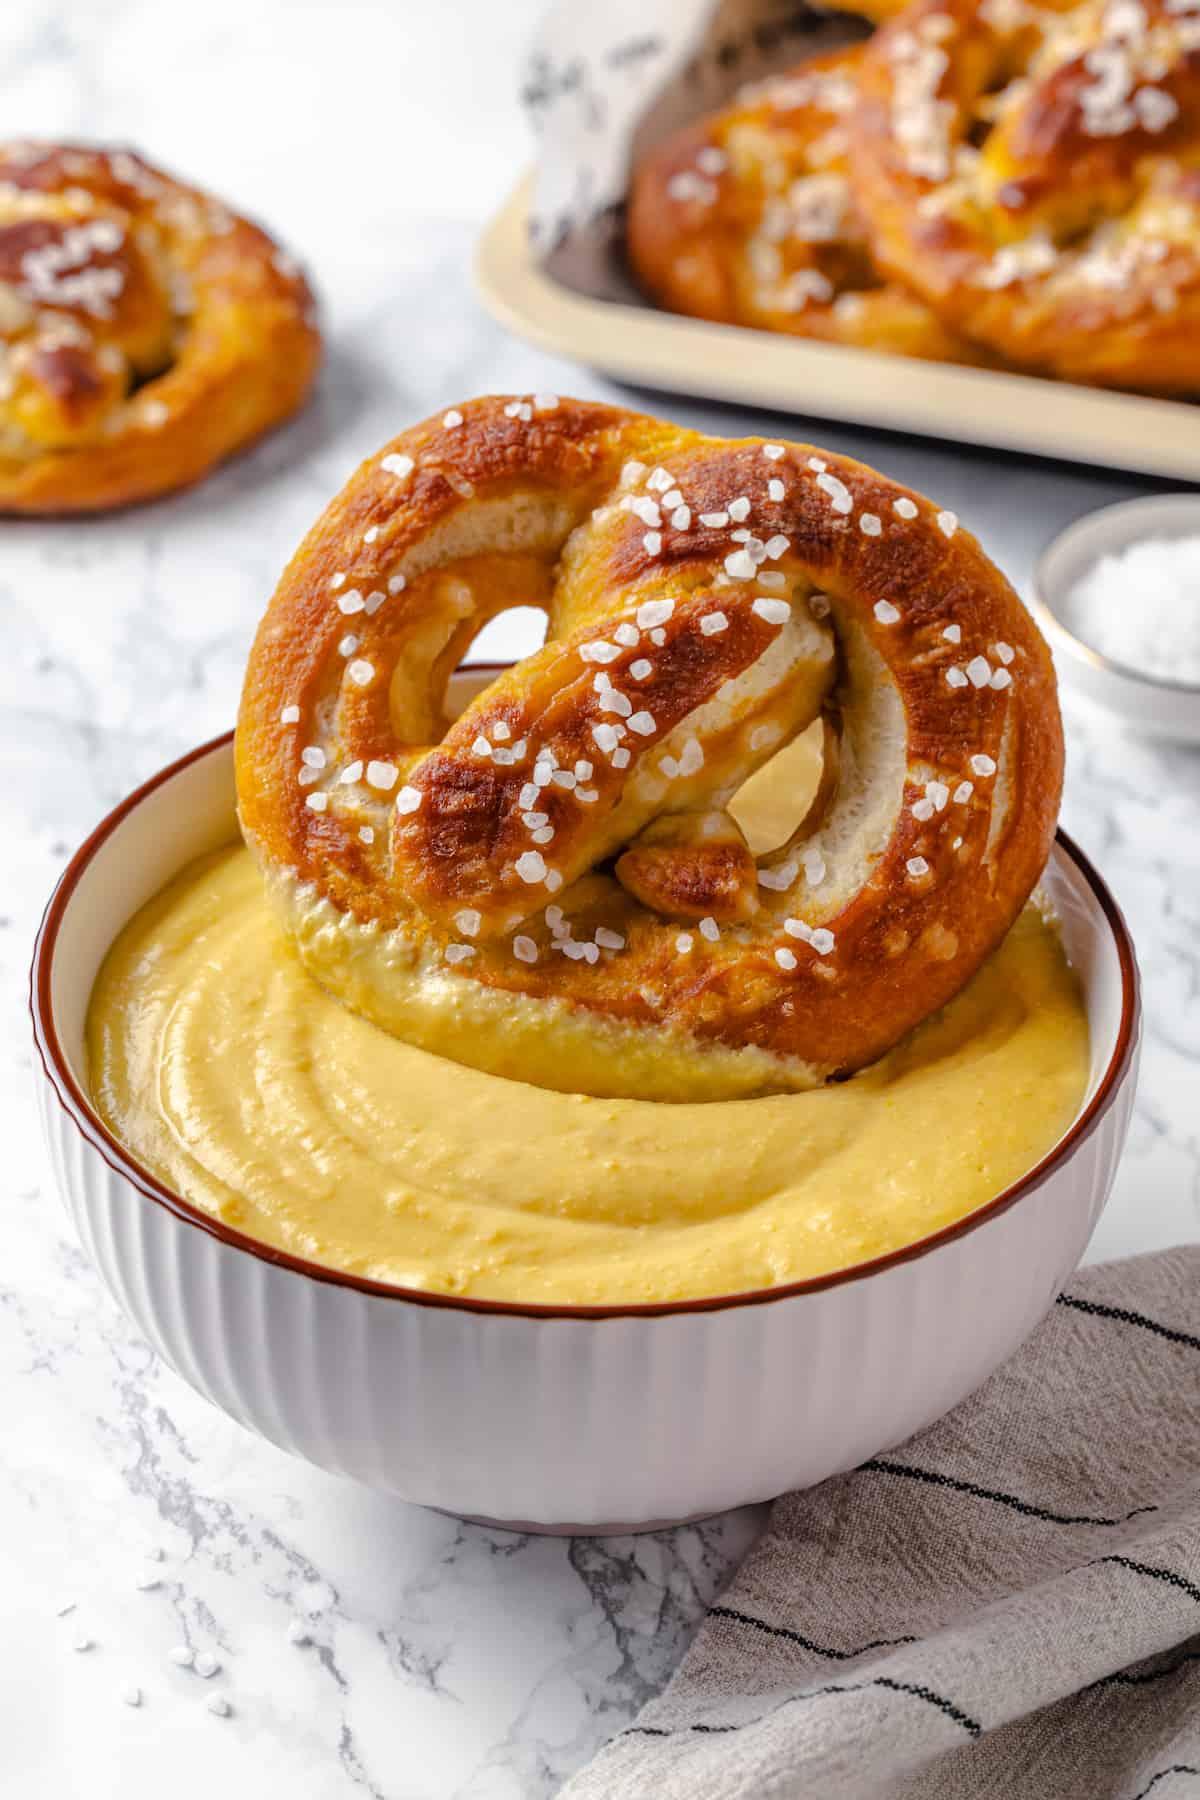 Vegan soft pretzel being dipped into beer cheese